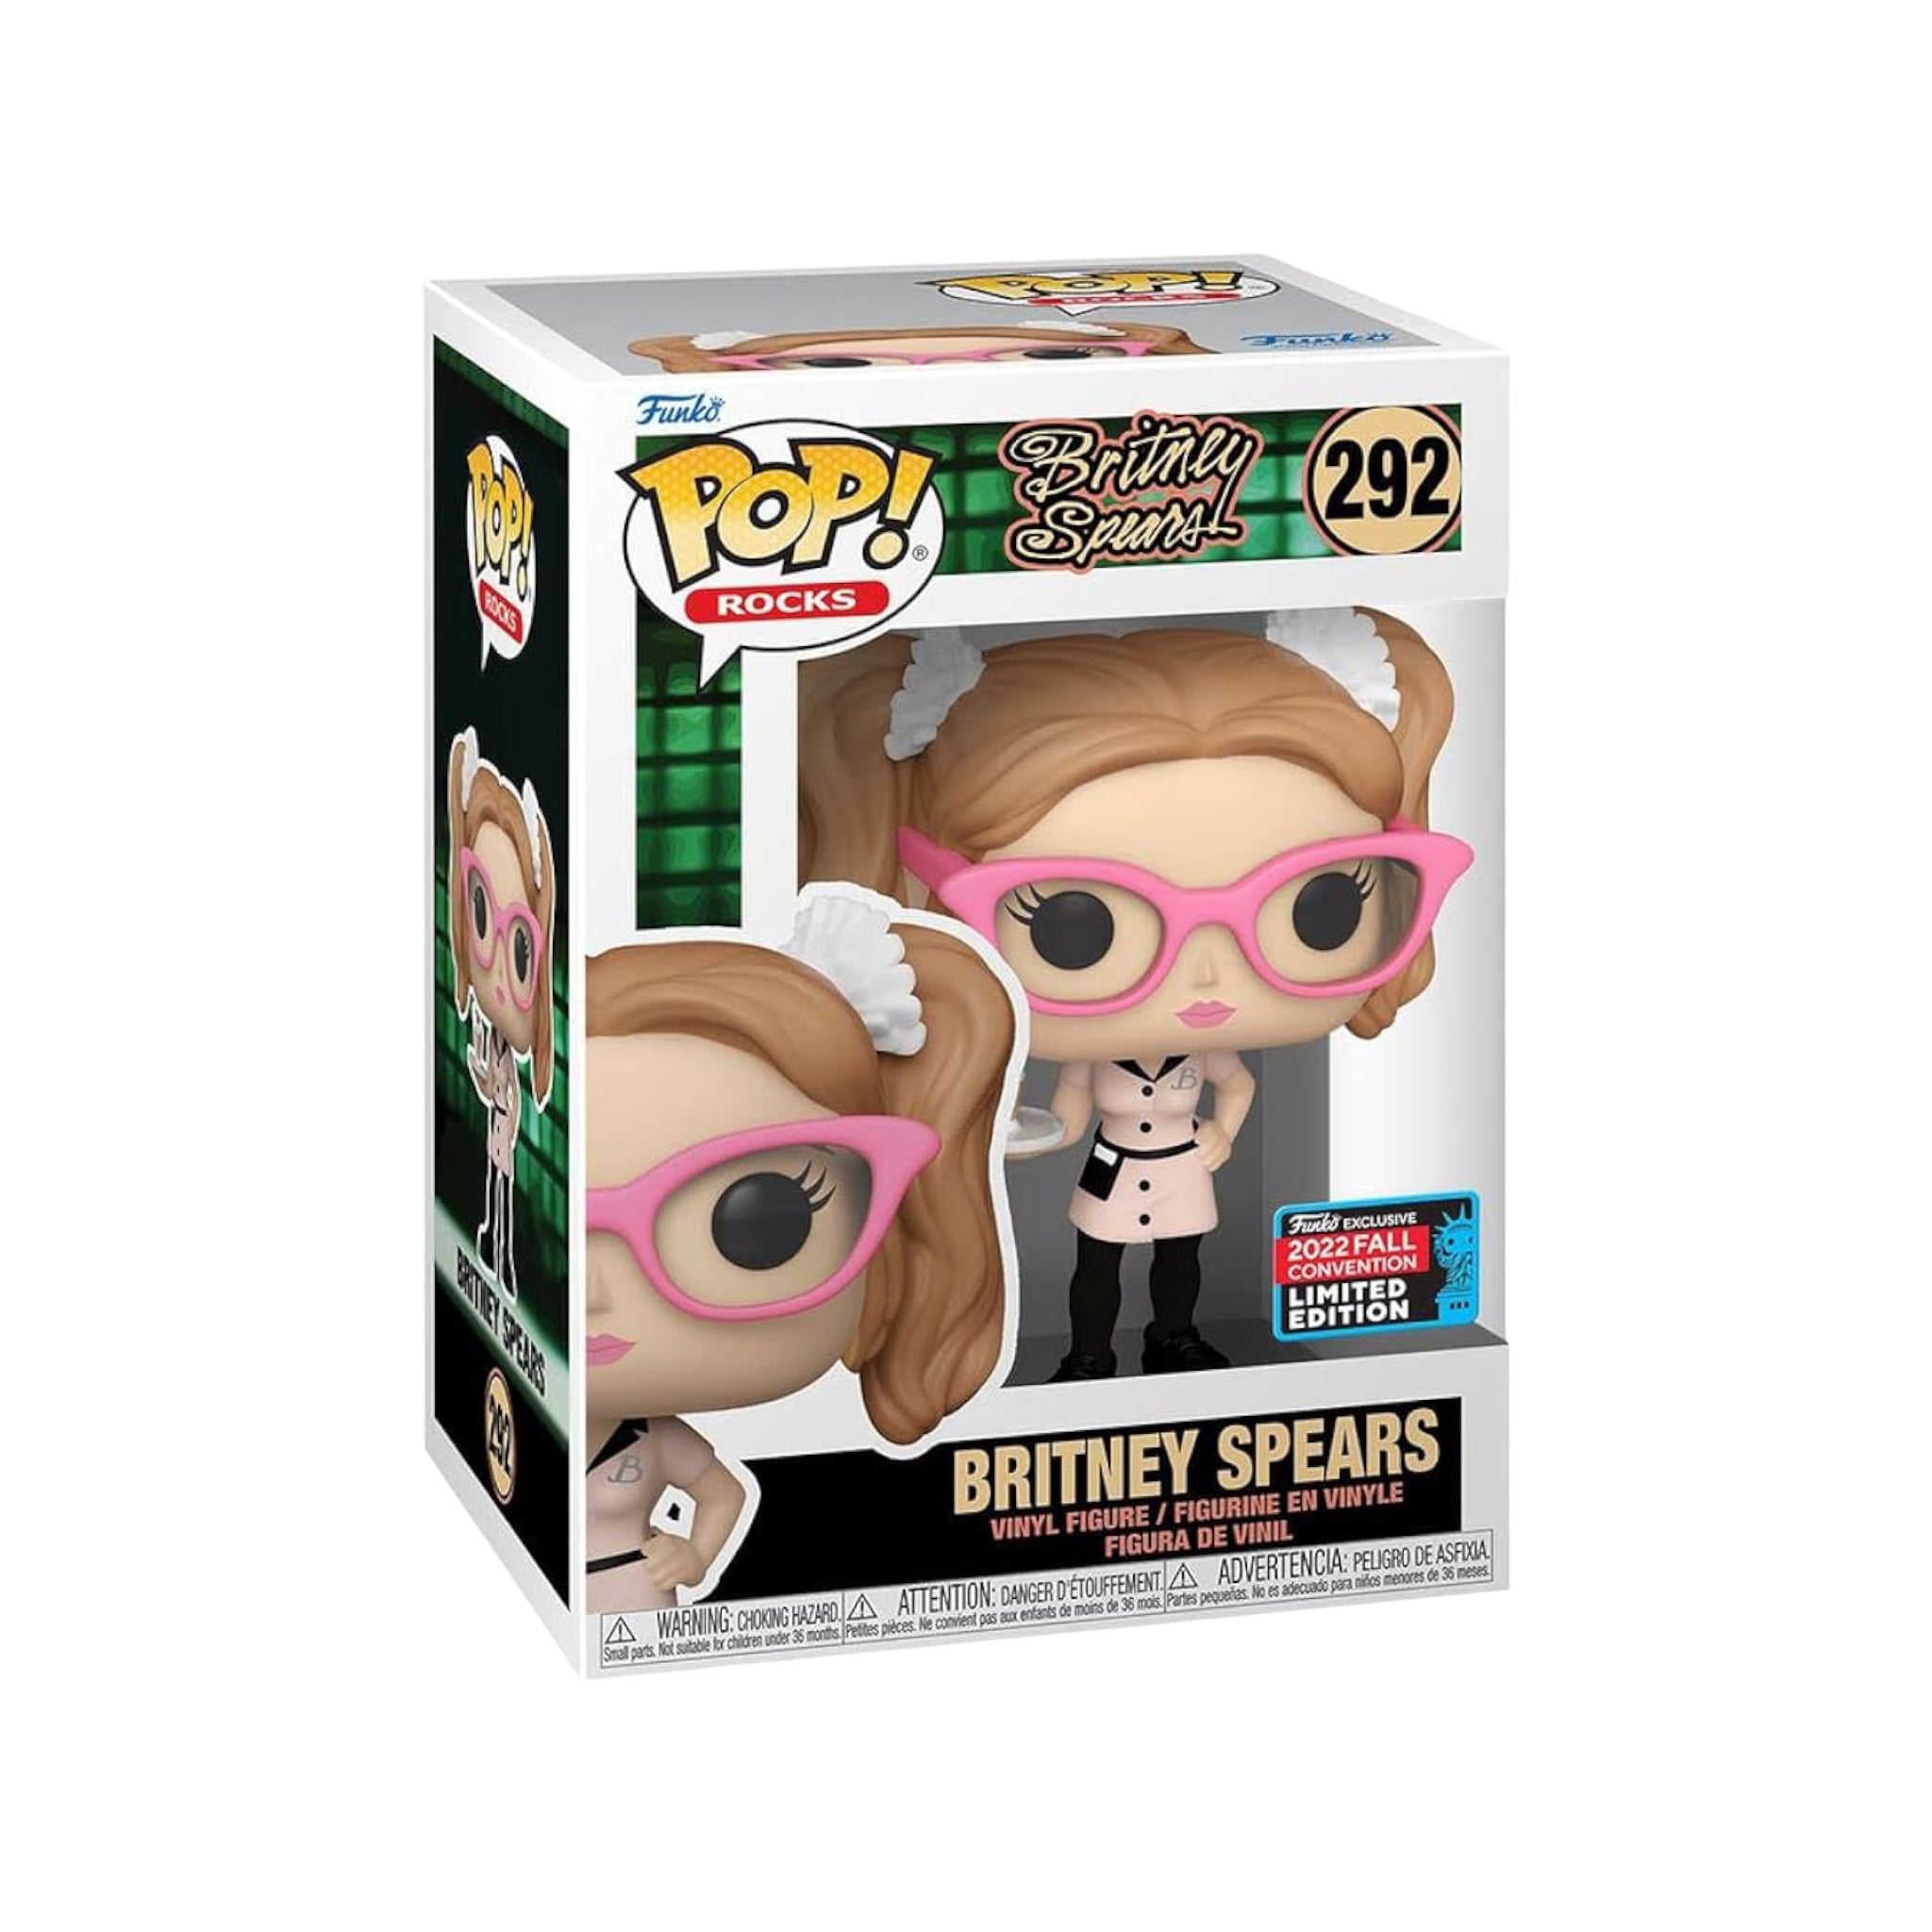 Britney Spears #292 Funko Pop! - Rocks - NYCC 2022 Shared Exclusive